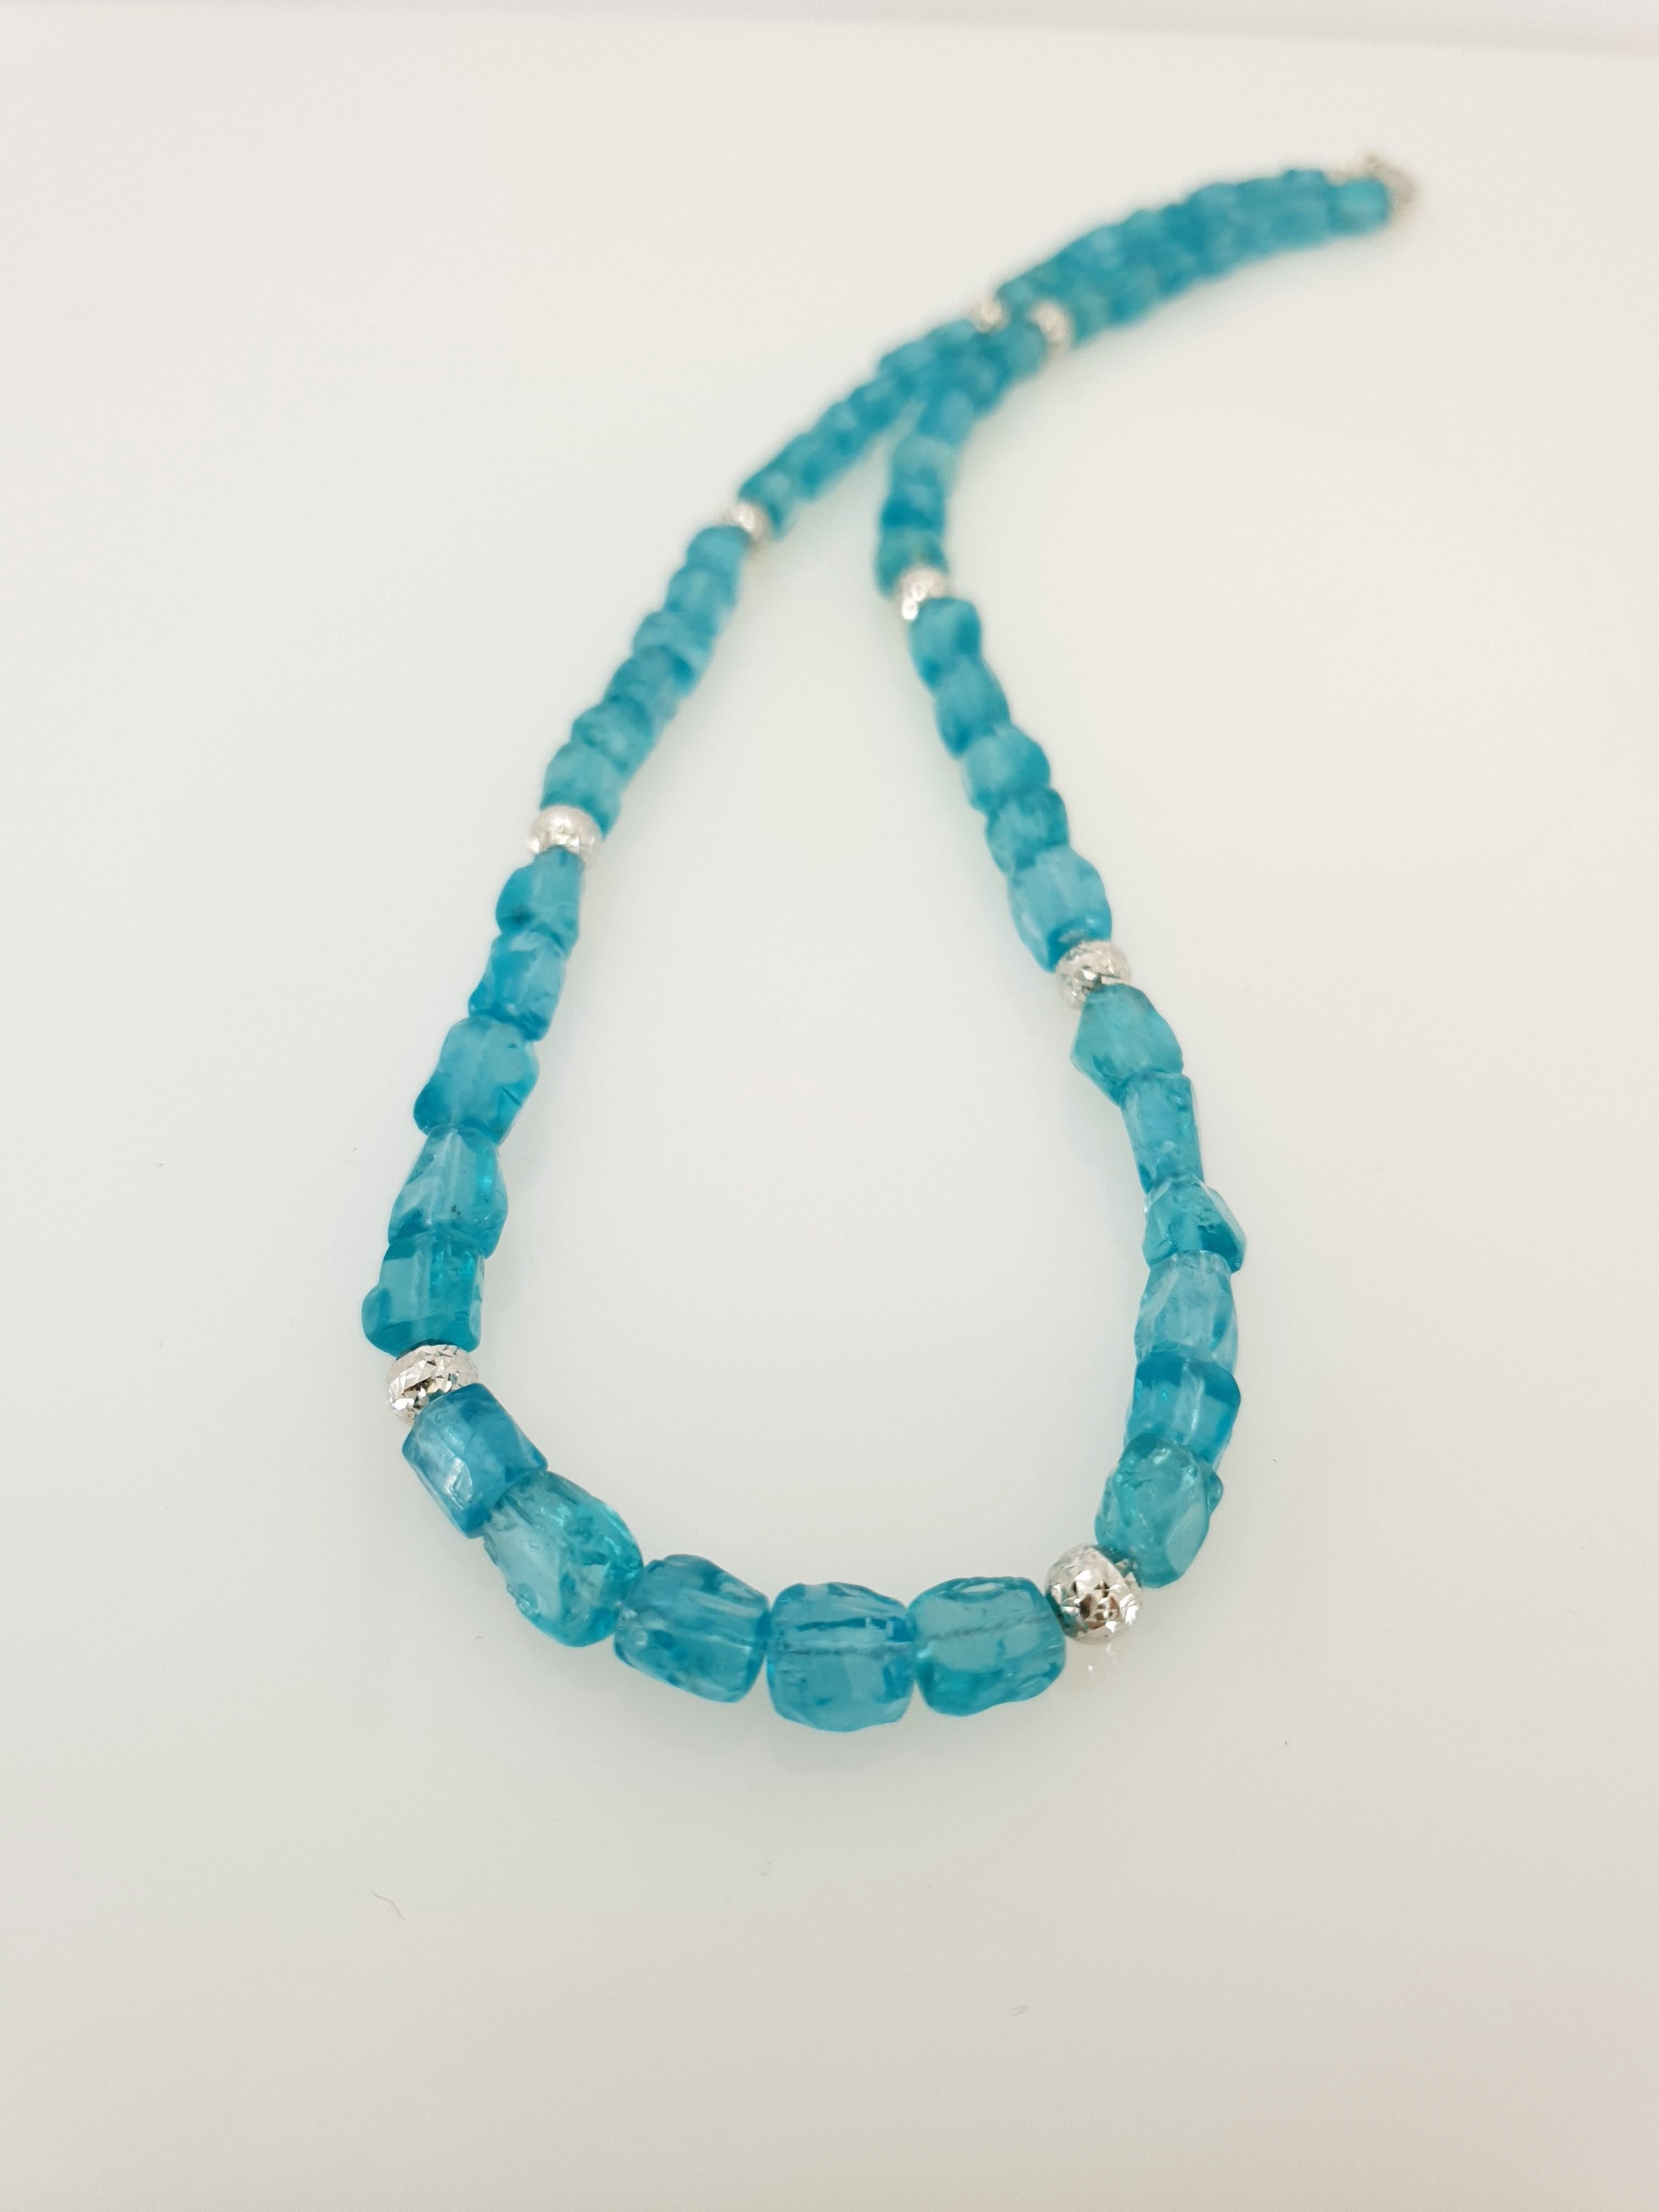 Paraiba Blue Apatite Nugget Beaded Necklace with 18 Carat White Gold 3